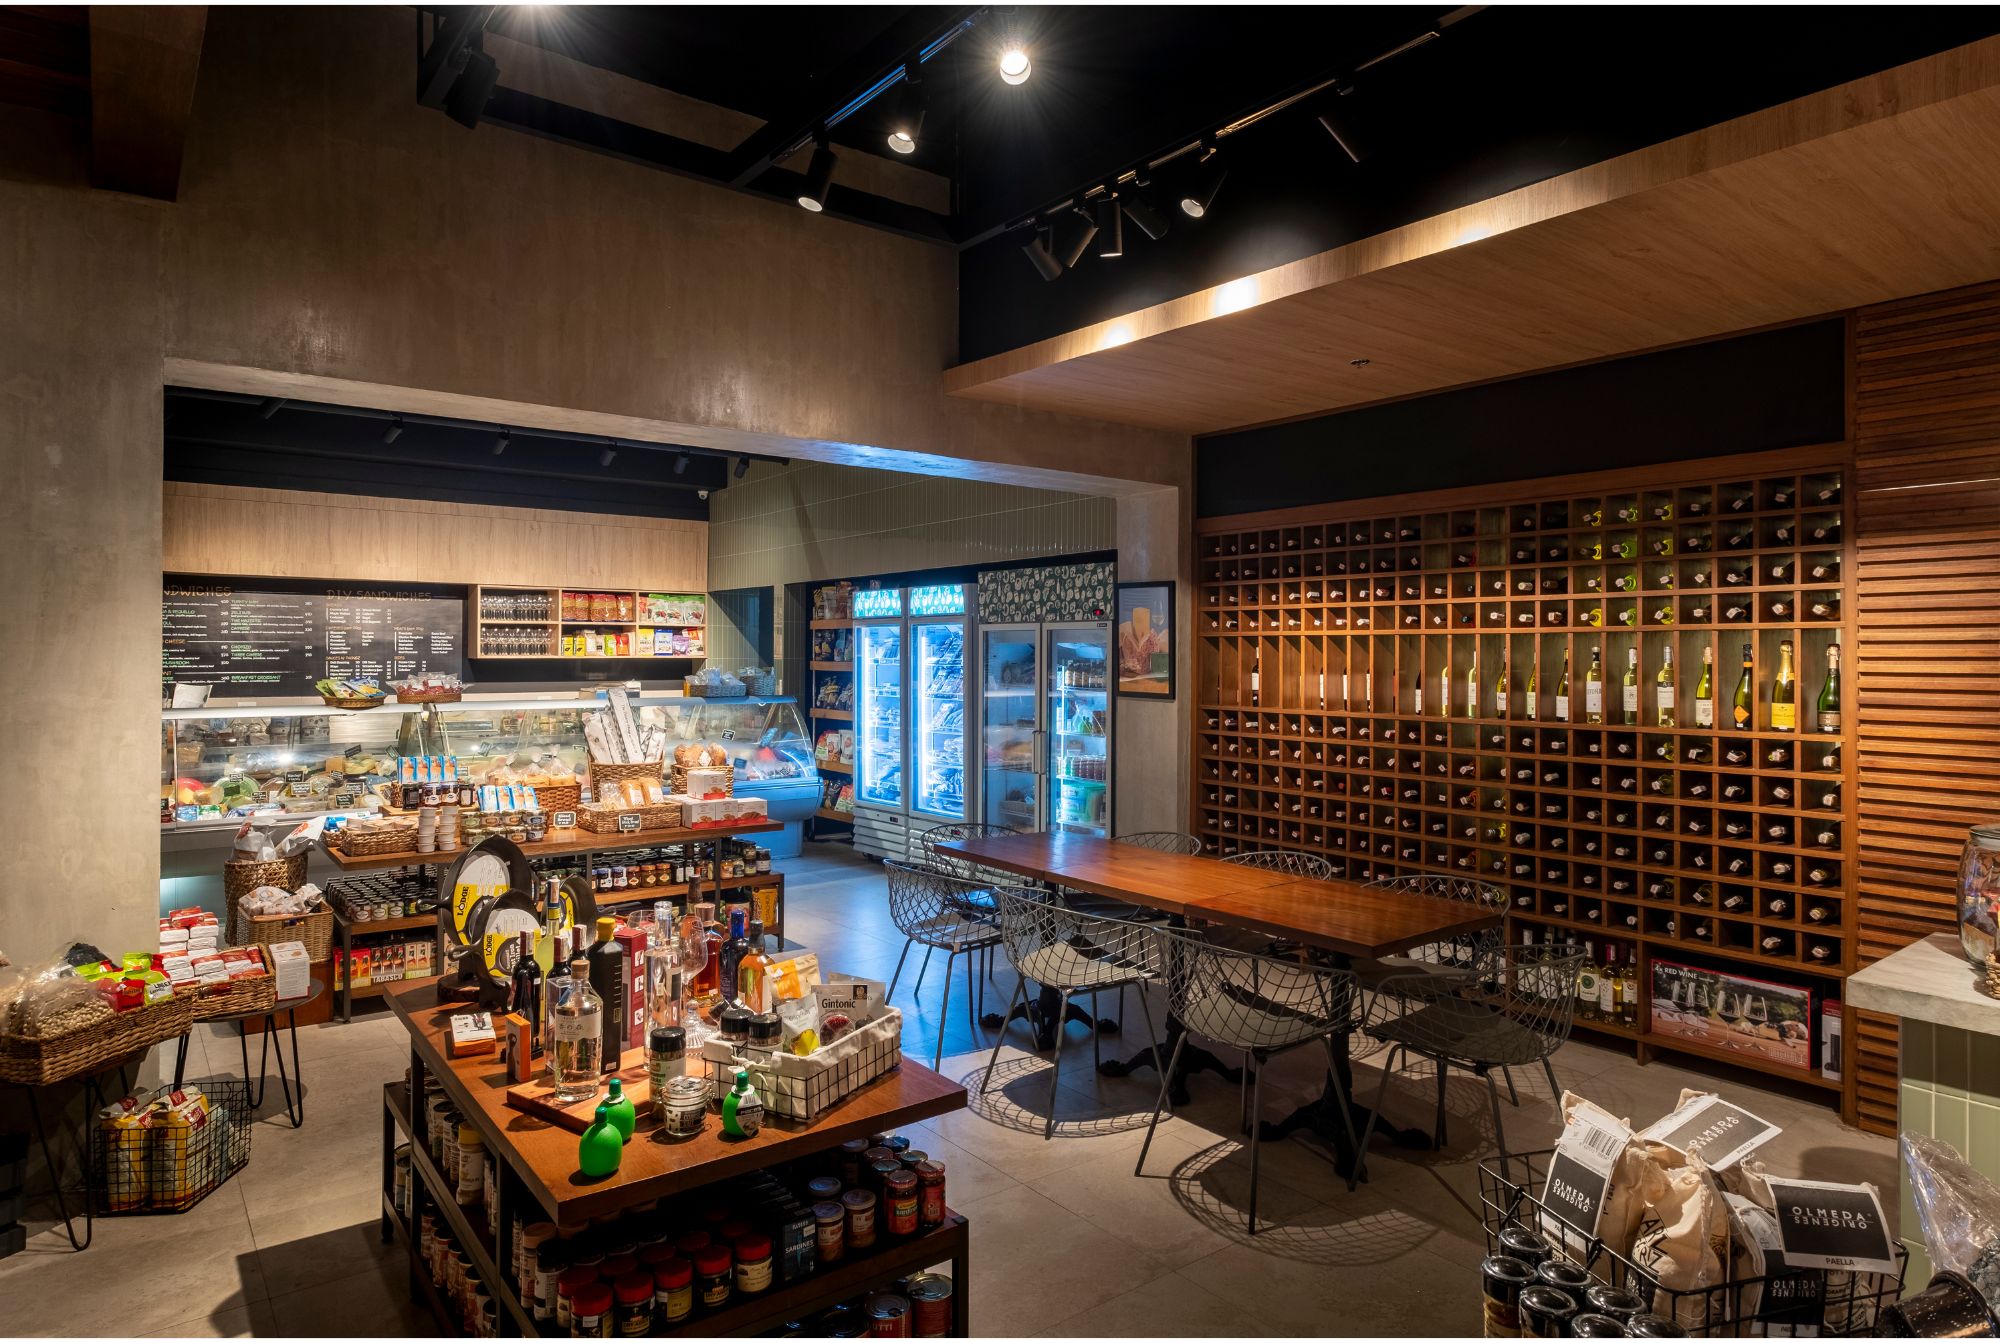 Cafe Bobs Deli designed by Larawan Ink in Bacolod, with shelves packed with goods.